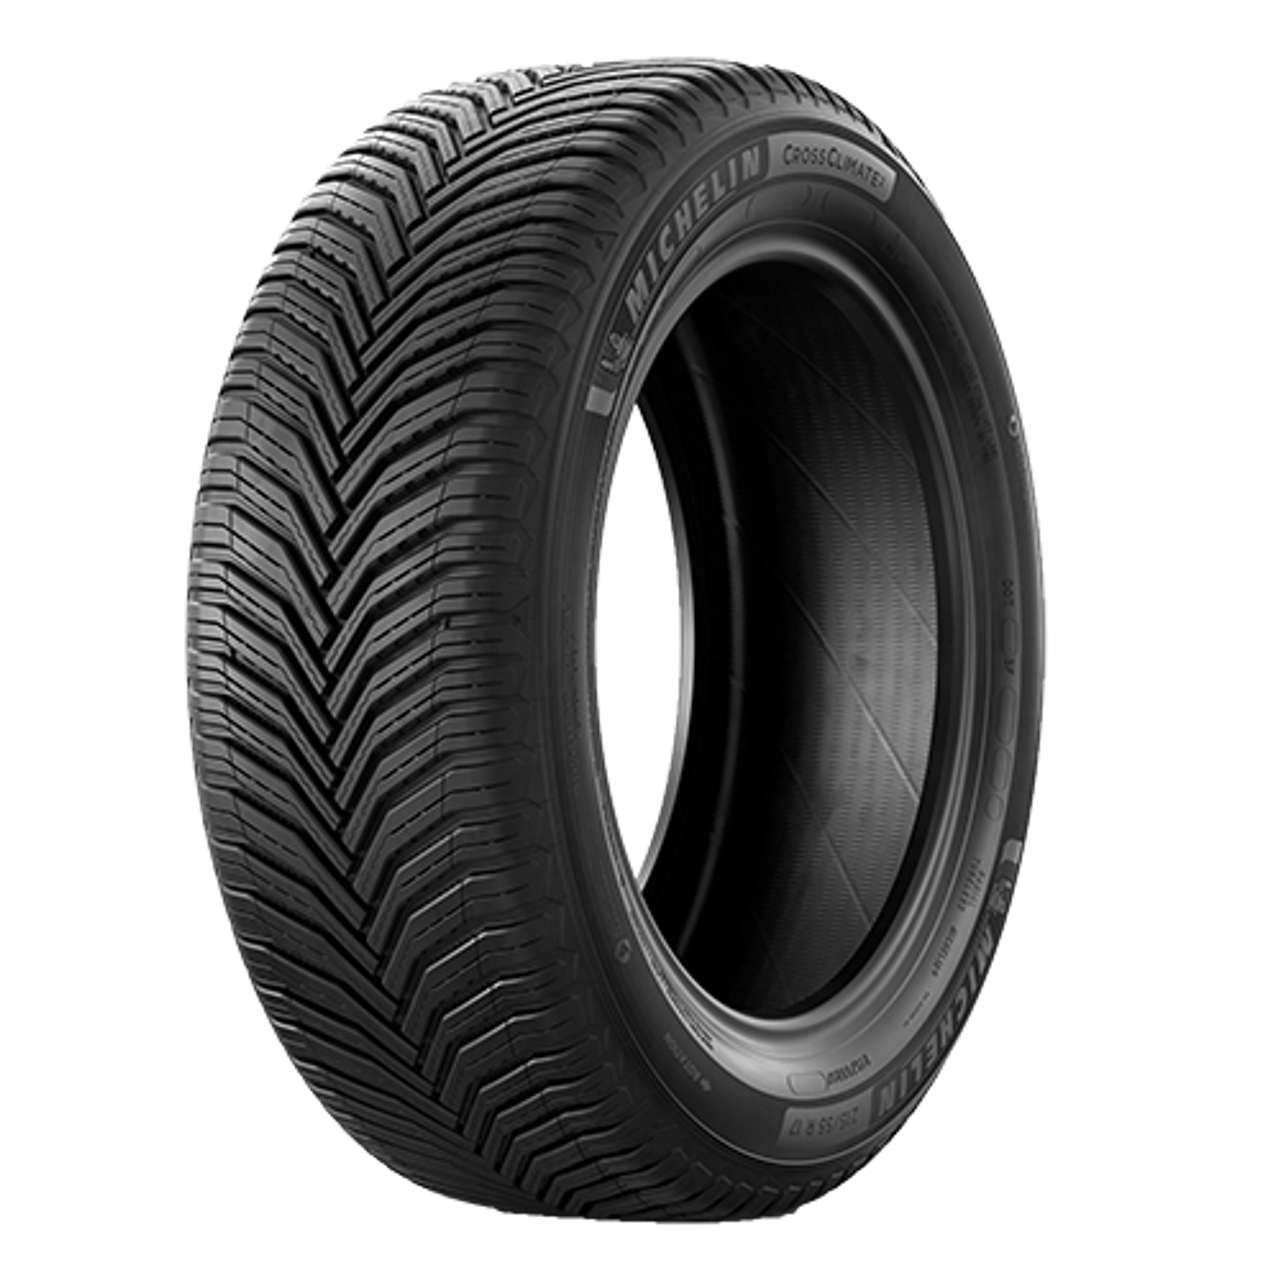 MICHELIN CROSSCLIMATE 2 235/55R18 100V BSW